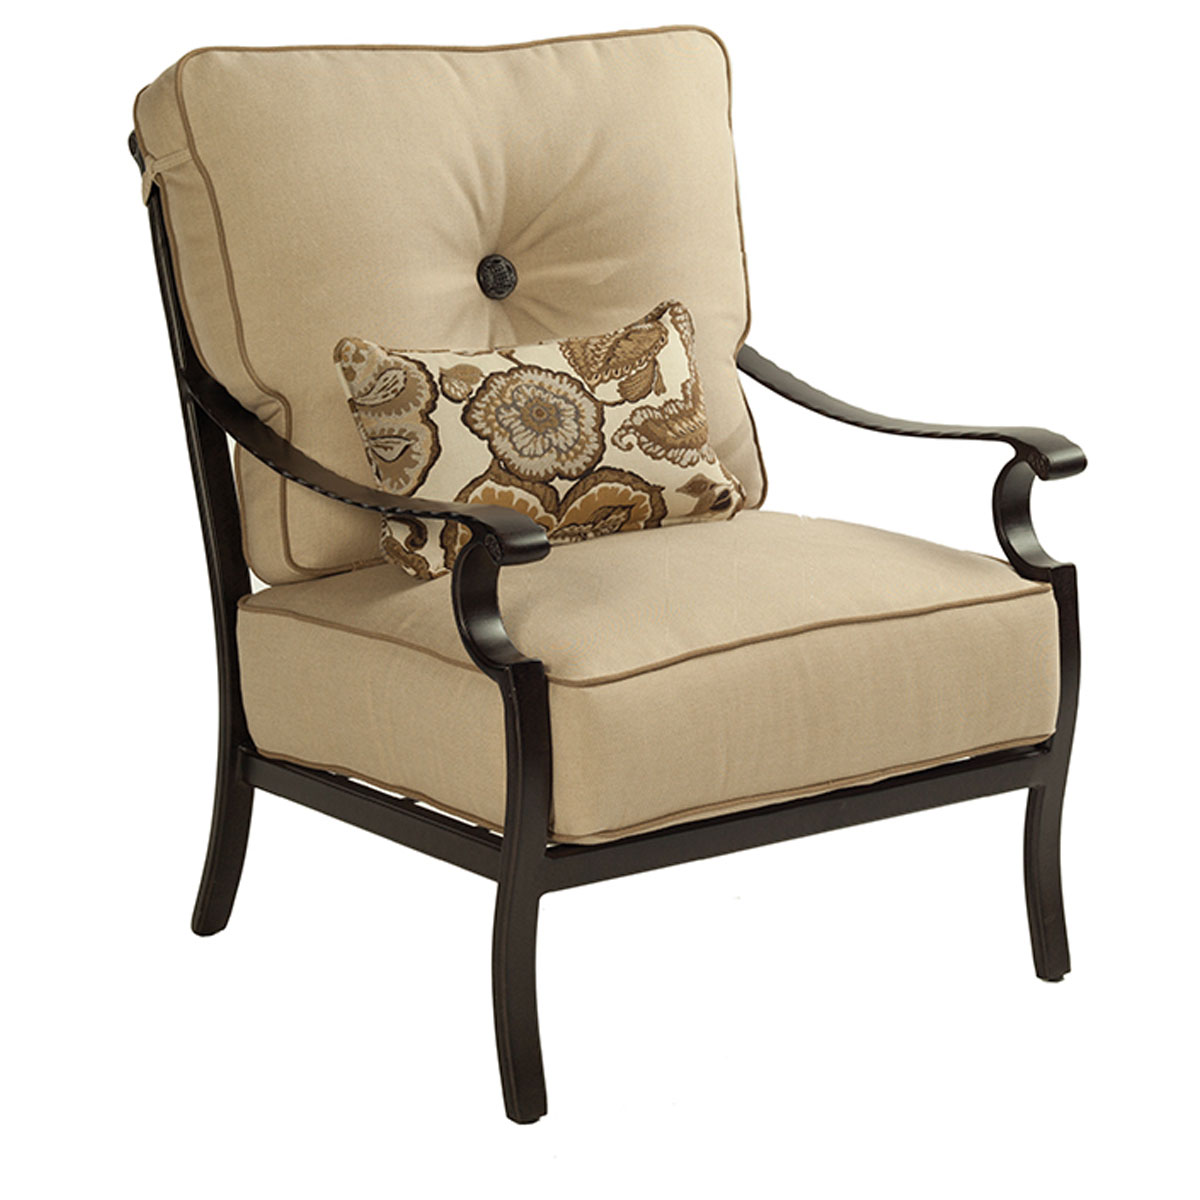 Castelle Monterey High Back Cushioned Lounge Chair